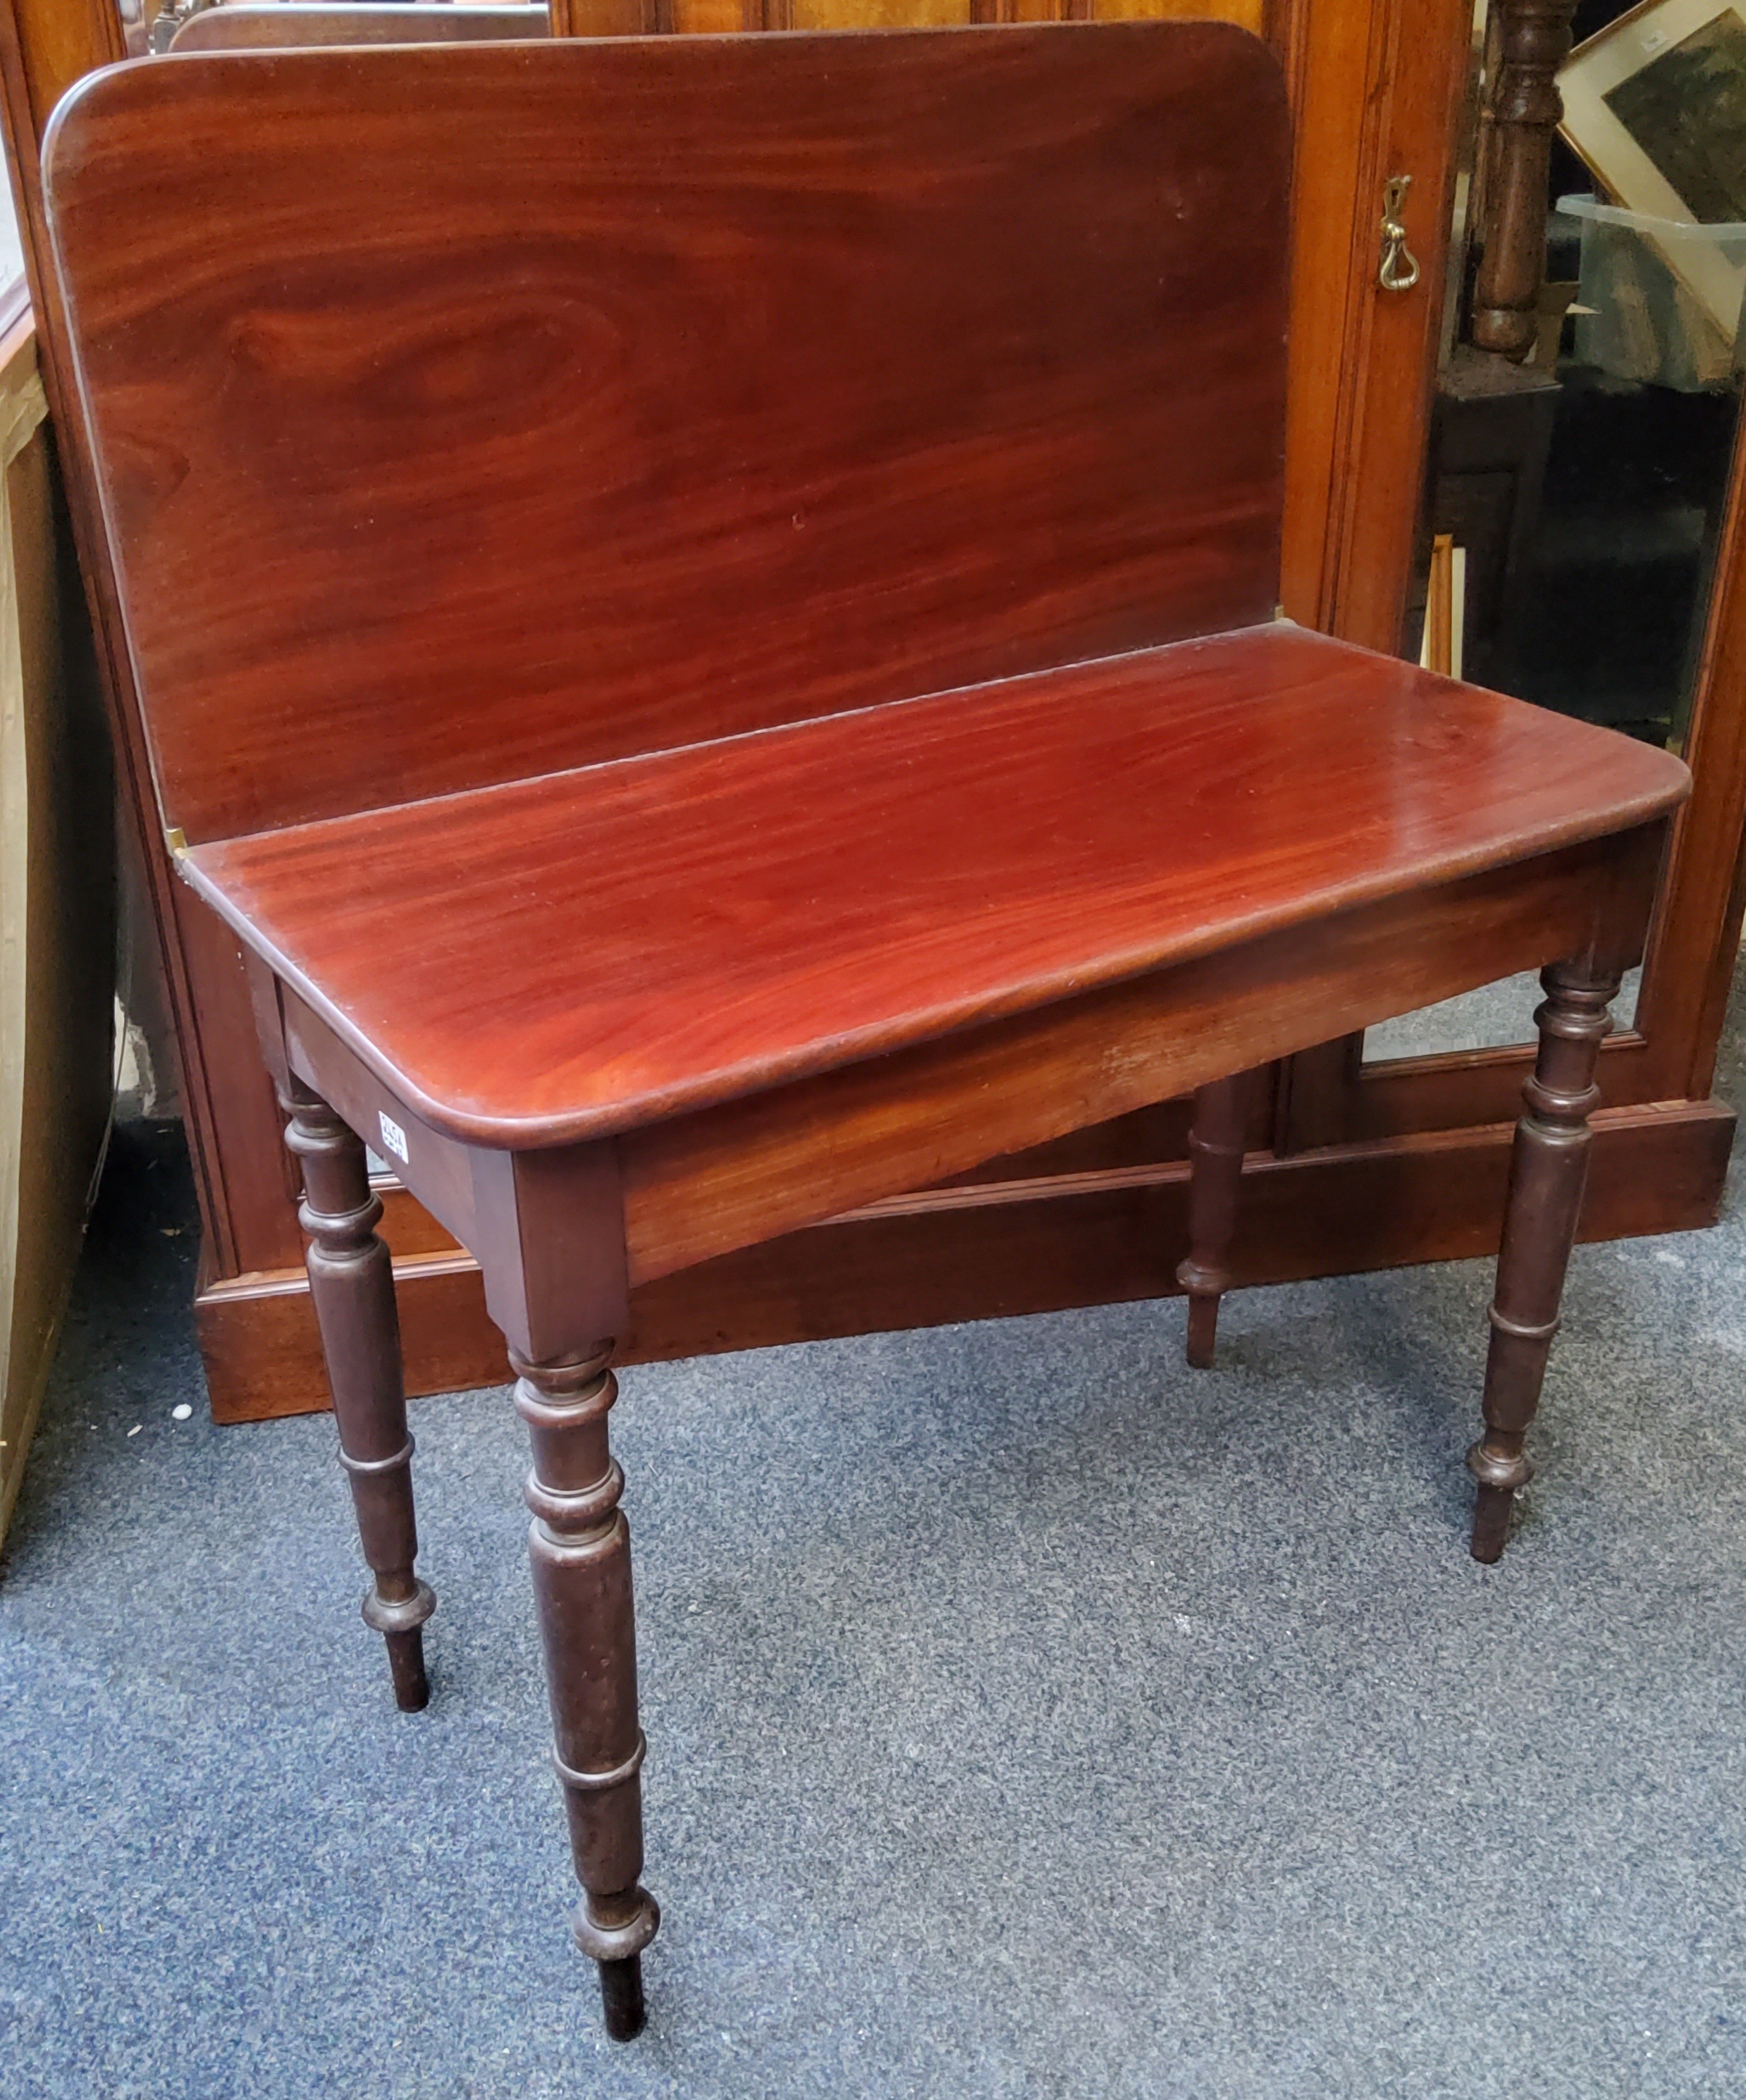 A 19th century mahogany folding tea table, rounded rectangular top, secret compartment, turned legs,